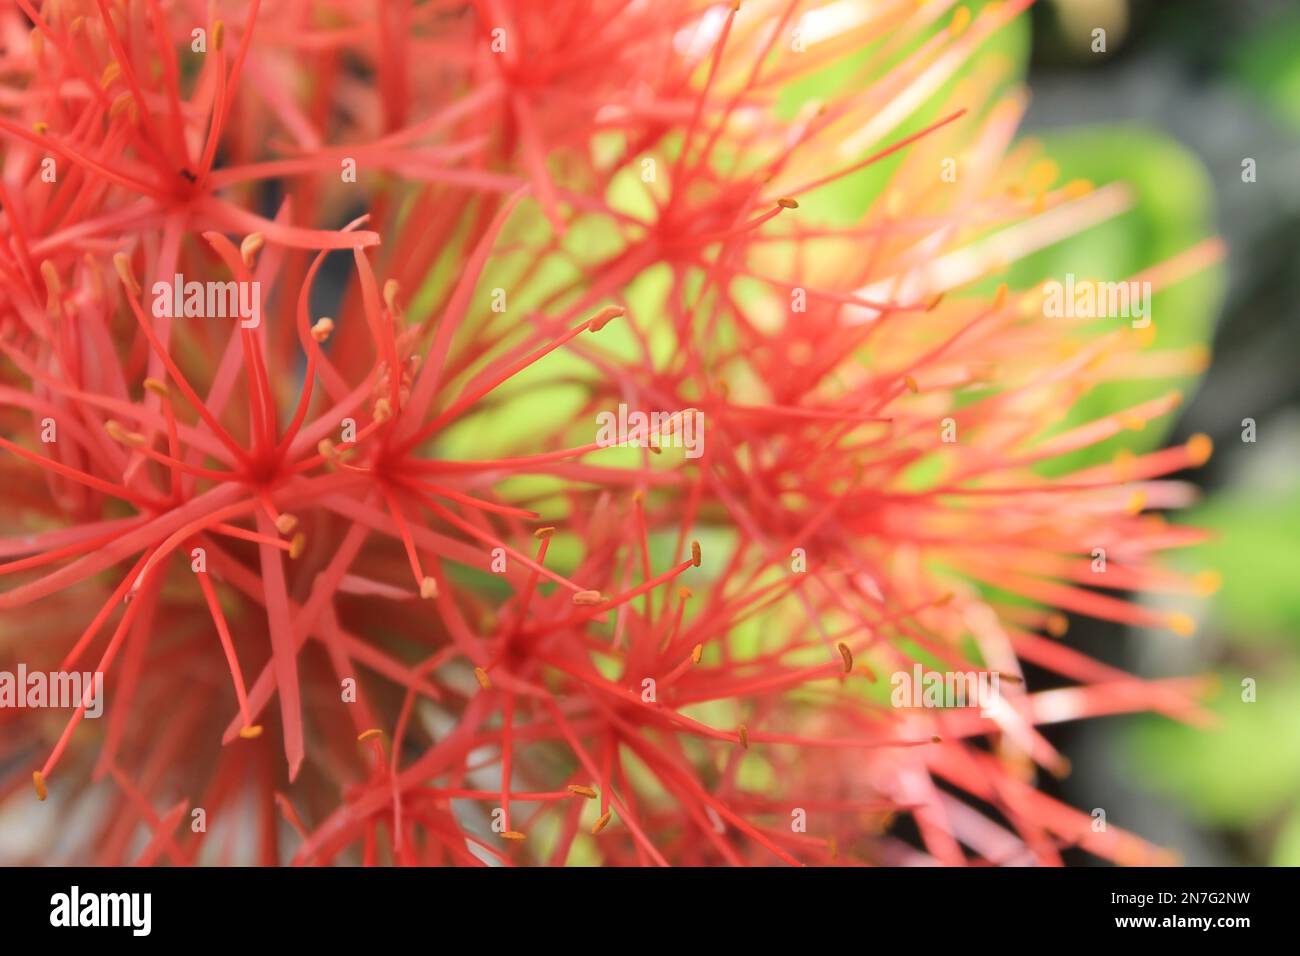 Blood lily flower with blur background Stock Photo